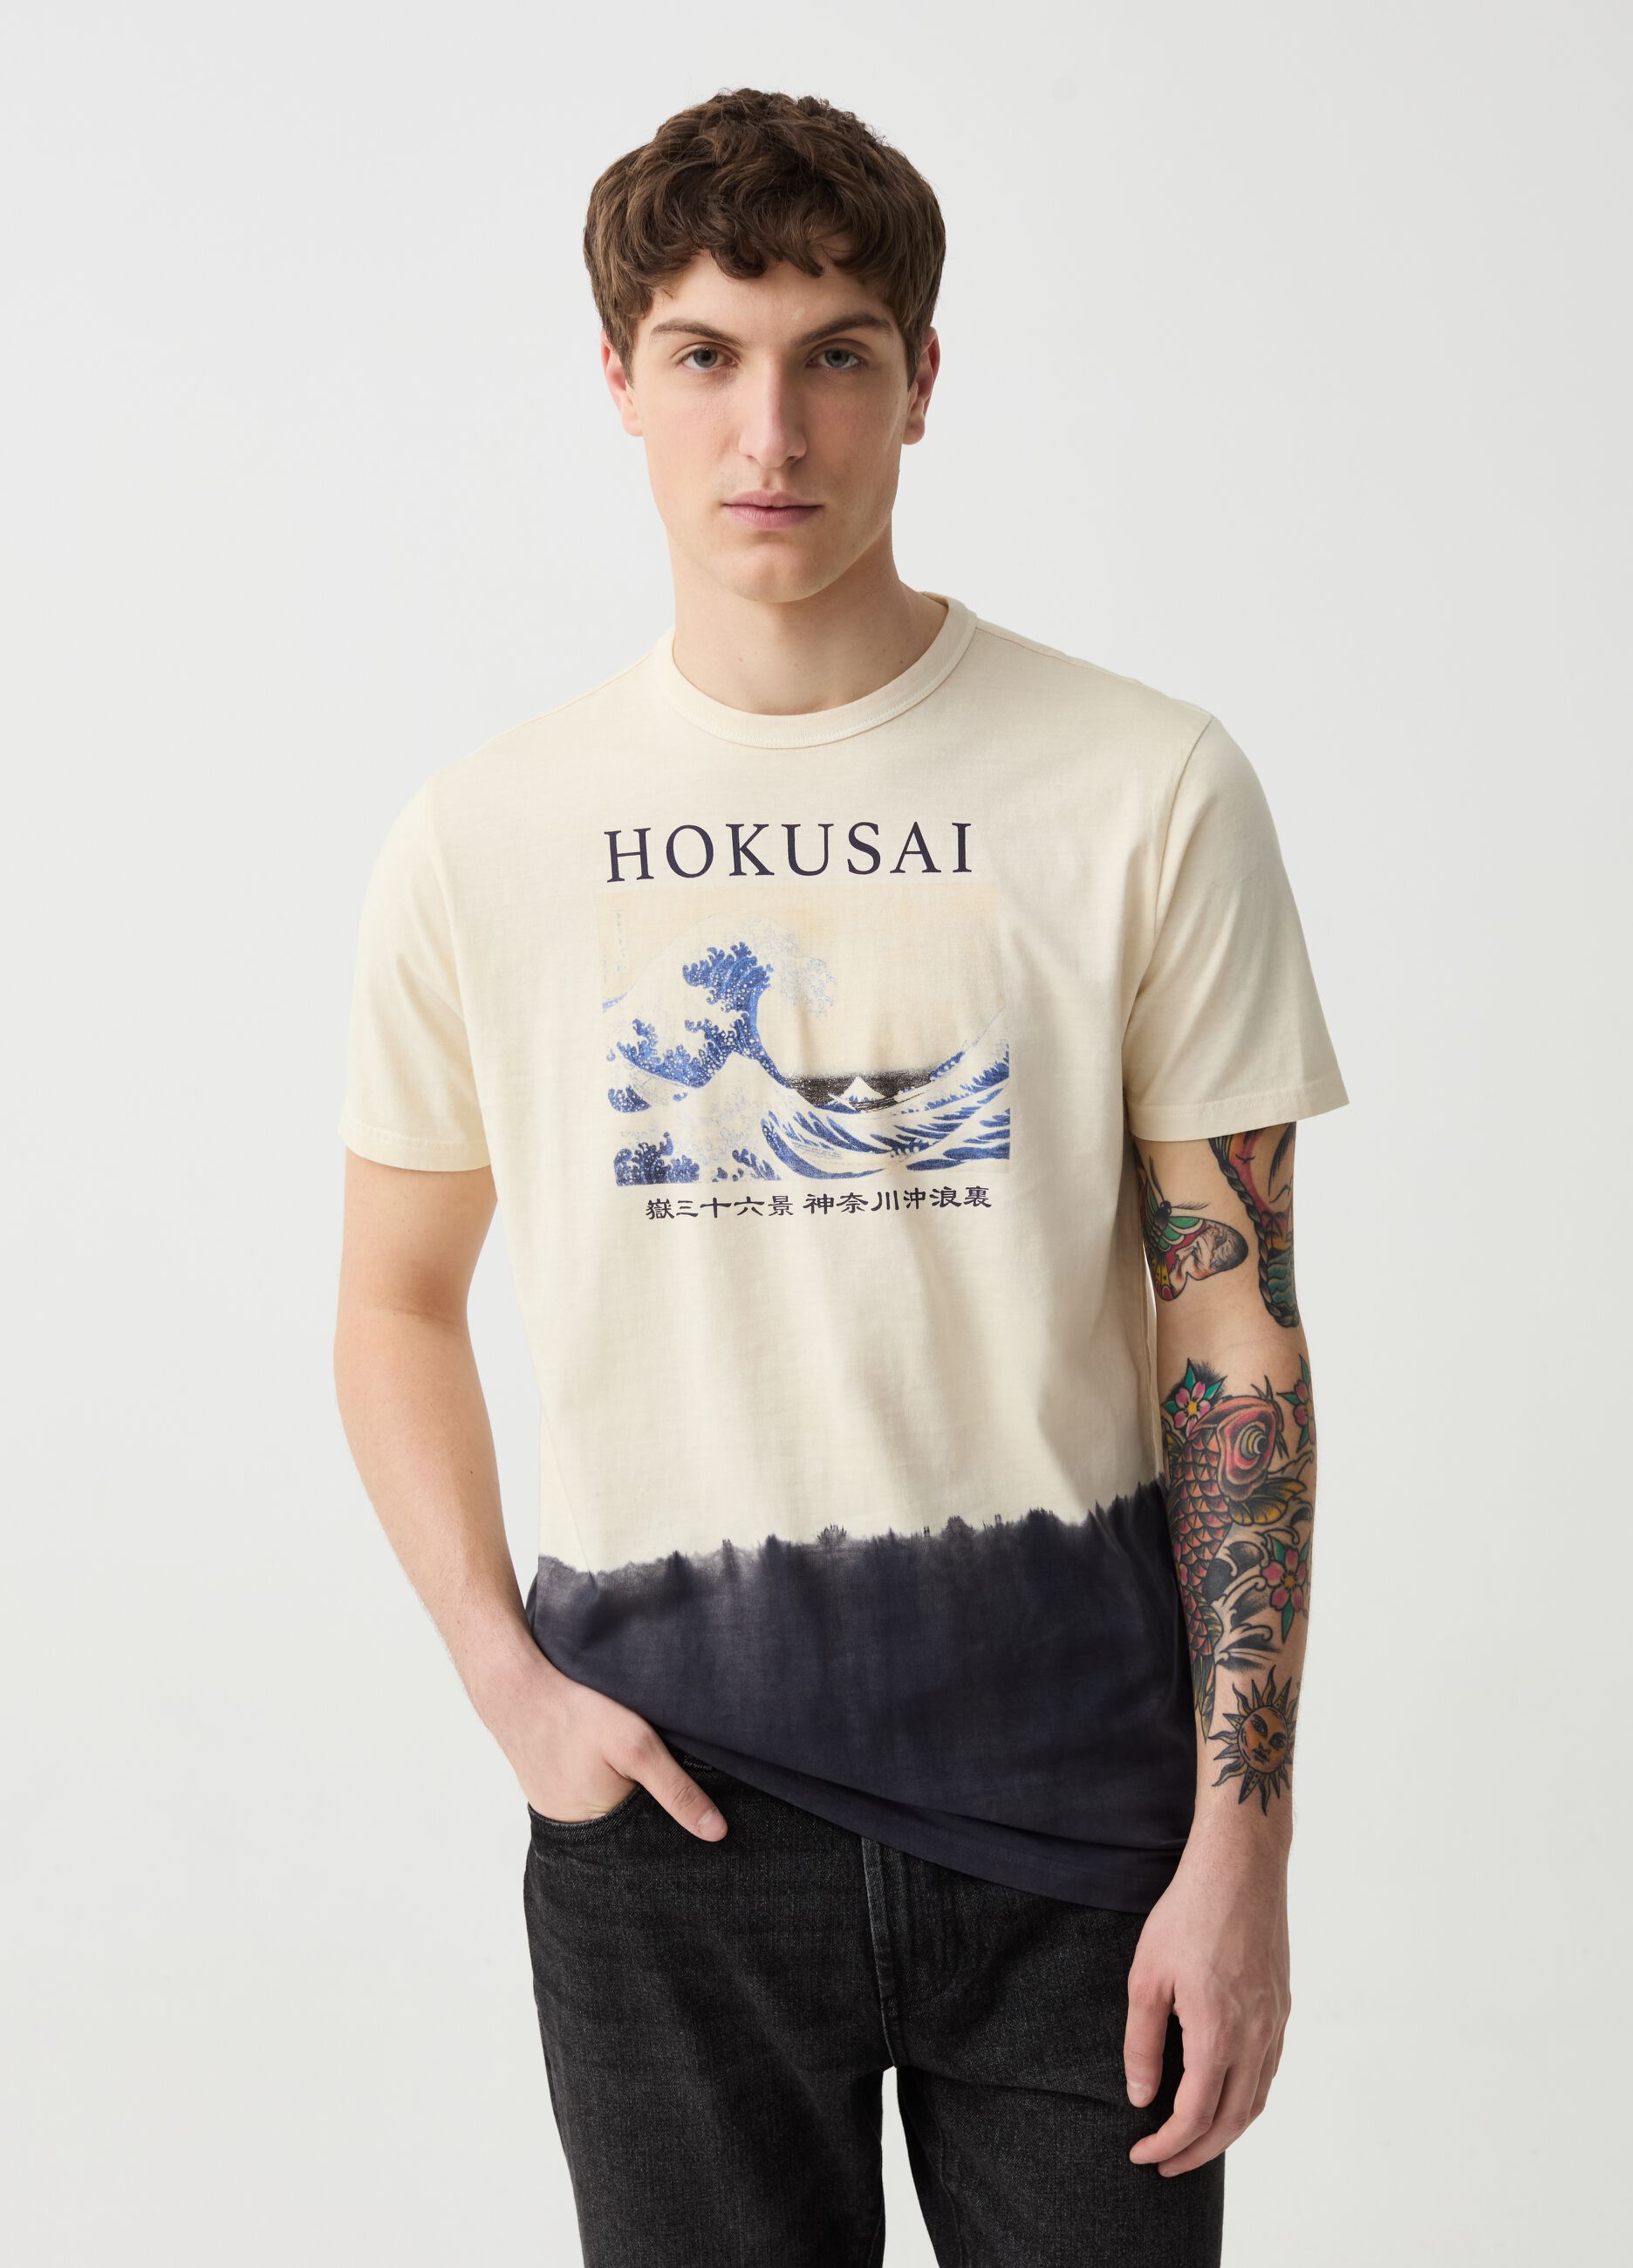 T-shirt with print of the Great Wave of Hokusai by Kanagawa